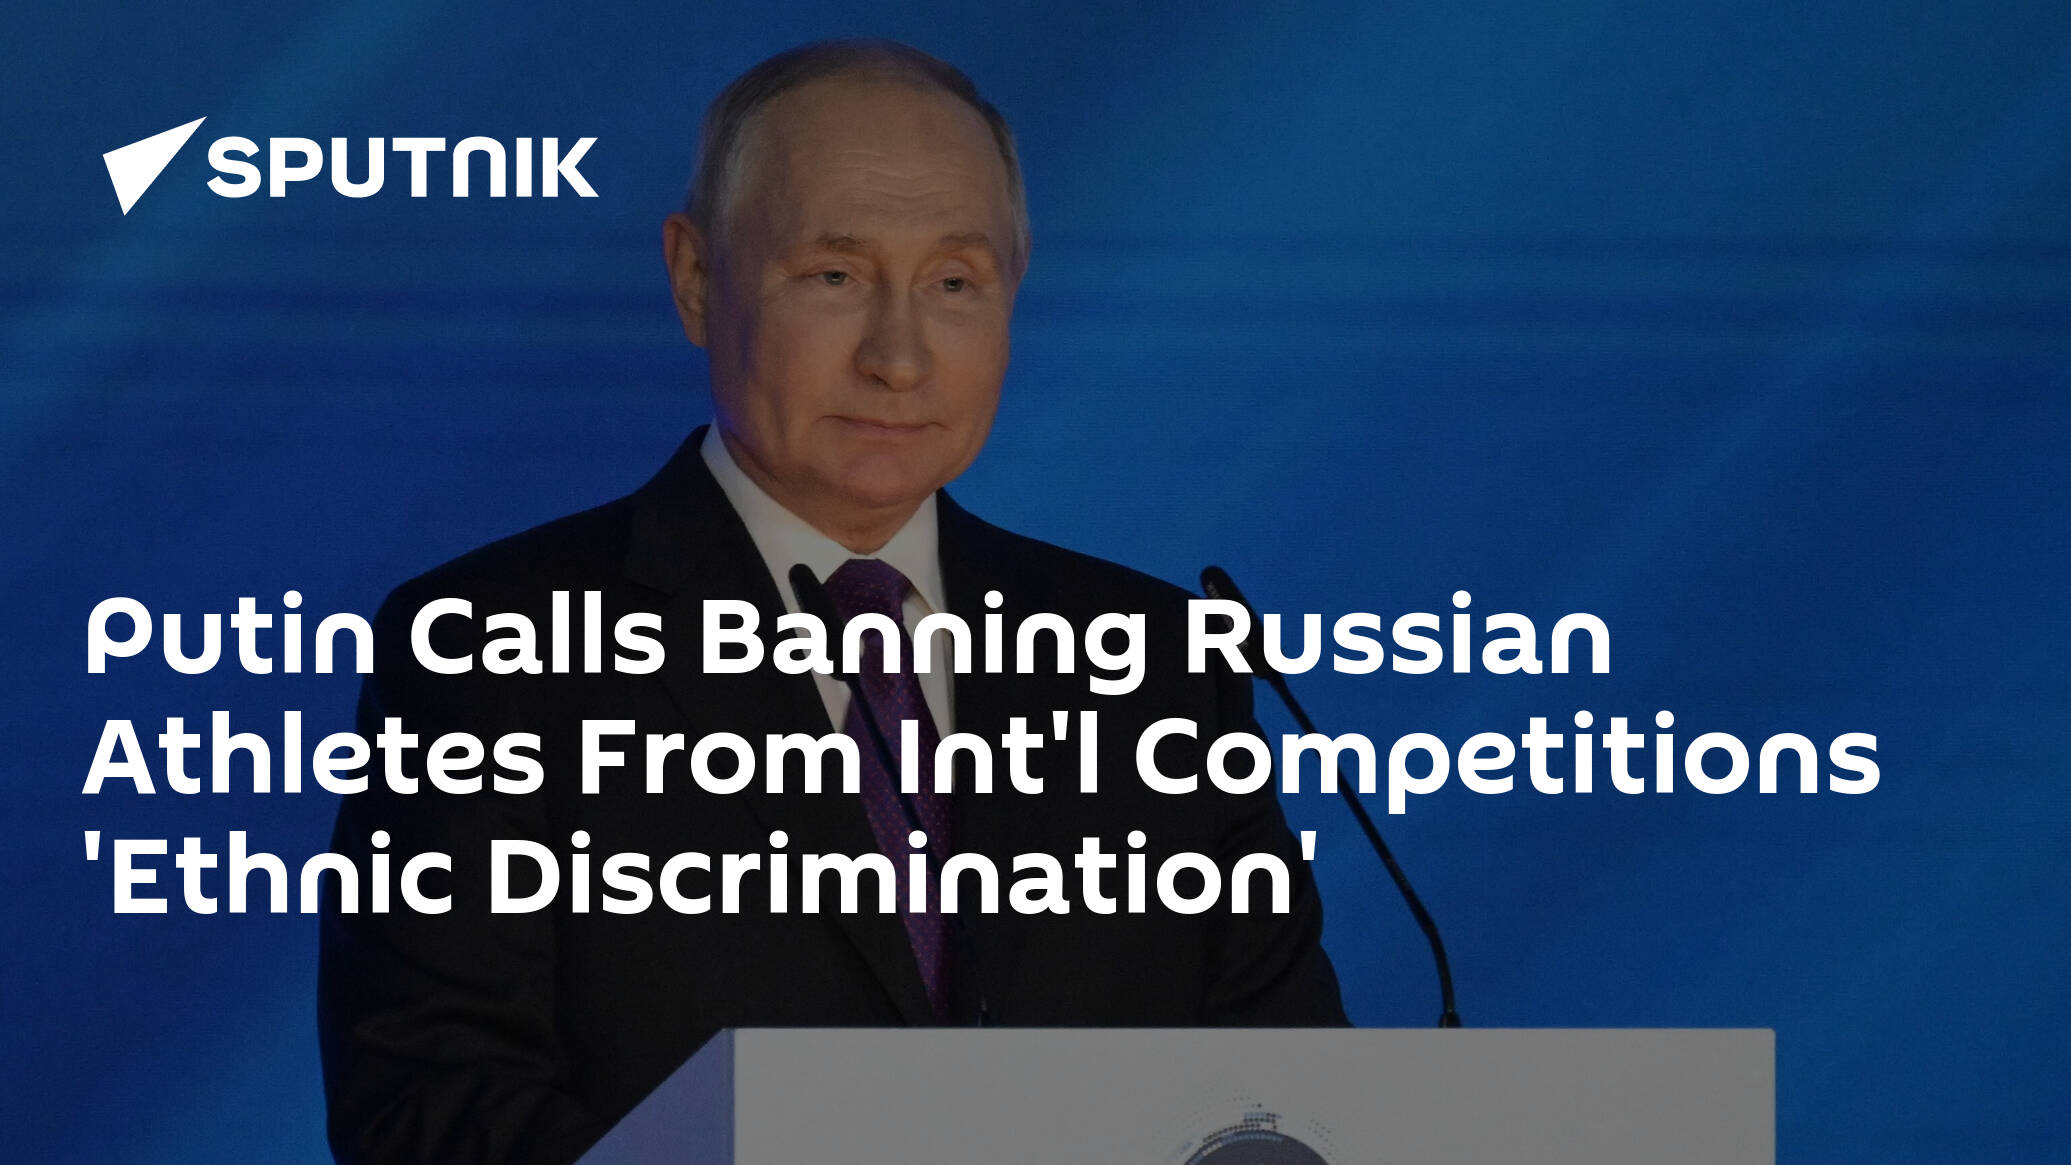 Putin Calls Banning Russian Athletes From Int'l Competitions 'Ethnic Discrimination'